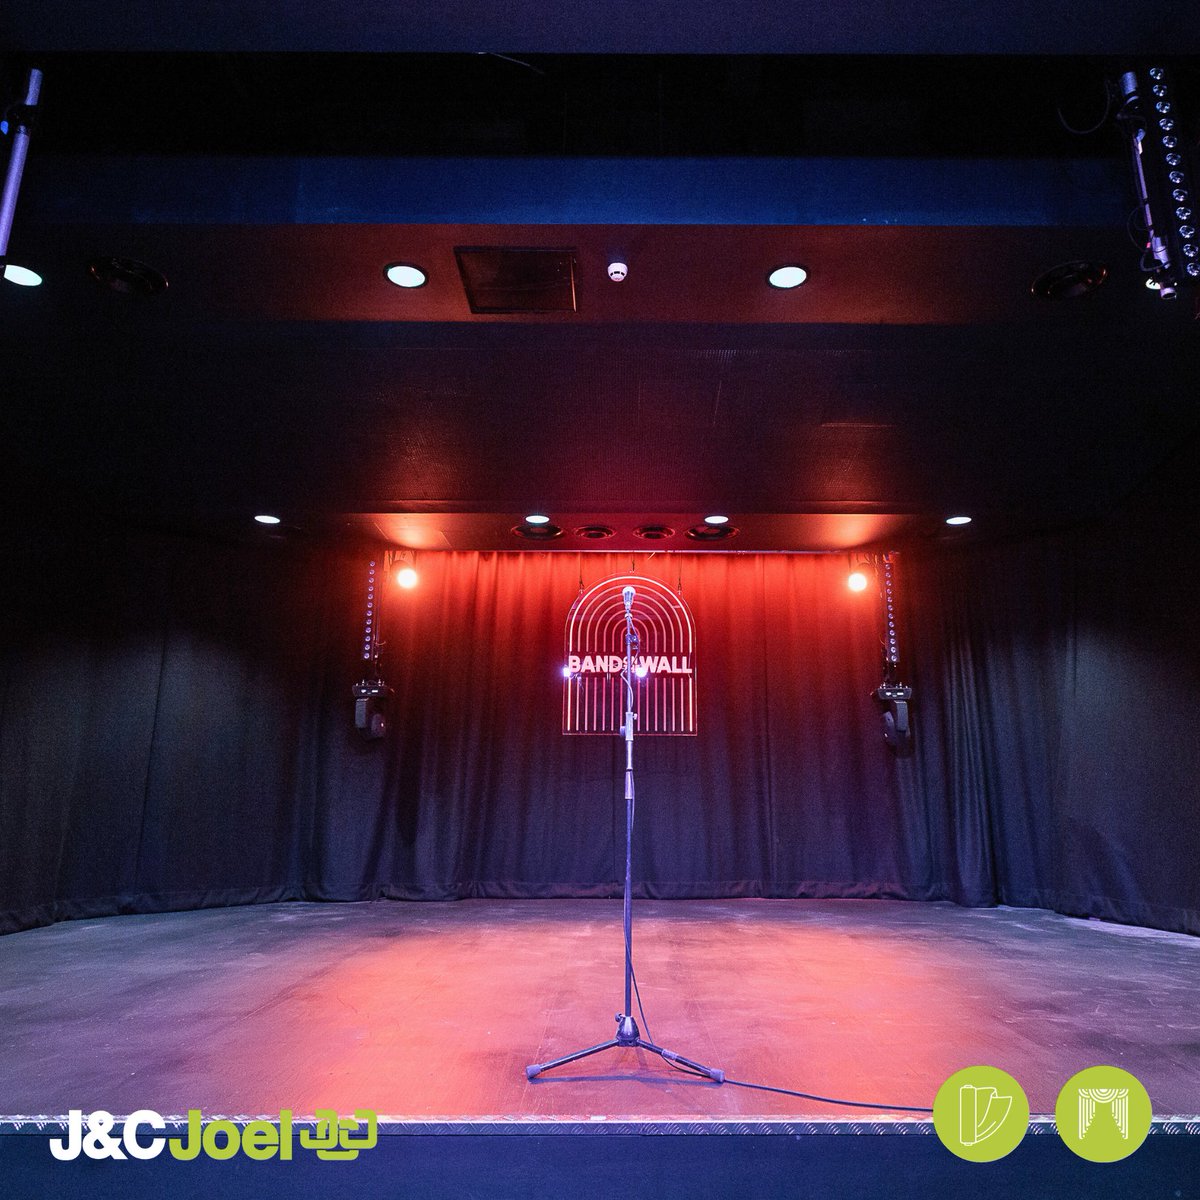 The renowned music venue in Manchester's Northern Quarter re-opened it's doors earlier this year after significant renovations. J&C Joel were proud to play their part in these renovations - providing track and drapery solutions for both stage areas. #bespokedrapery #Fabric